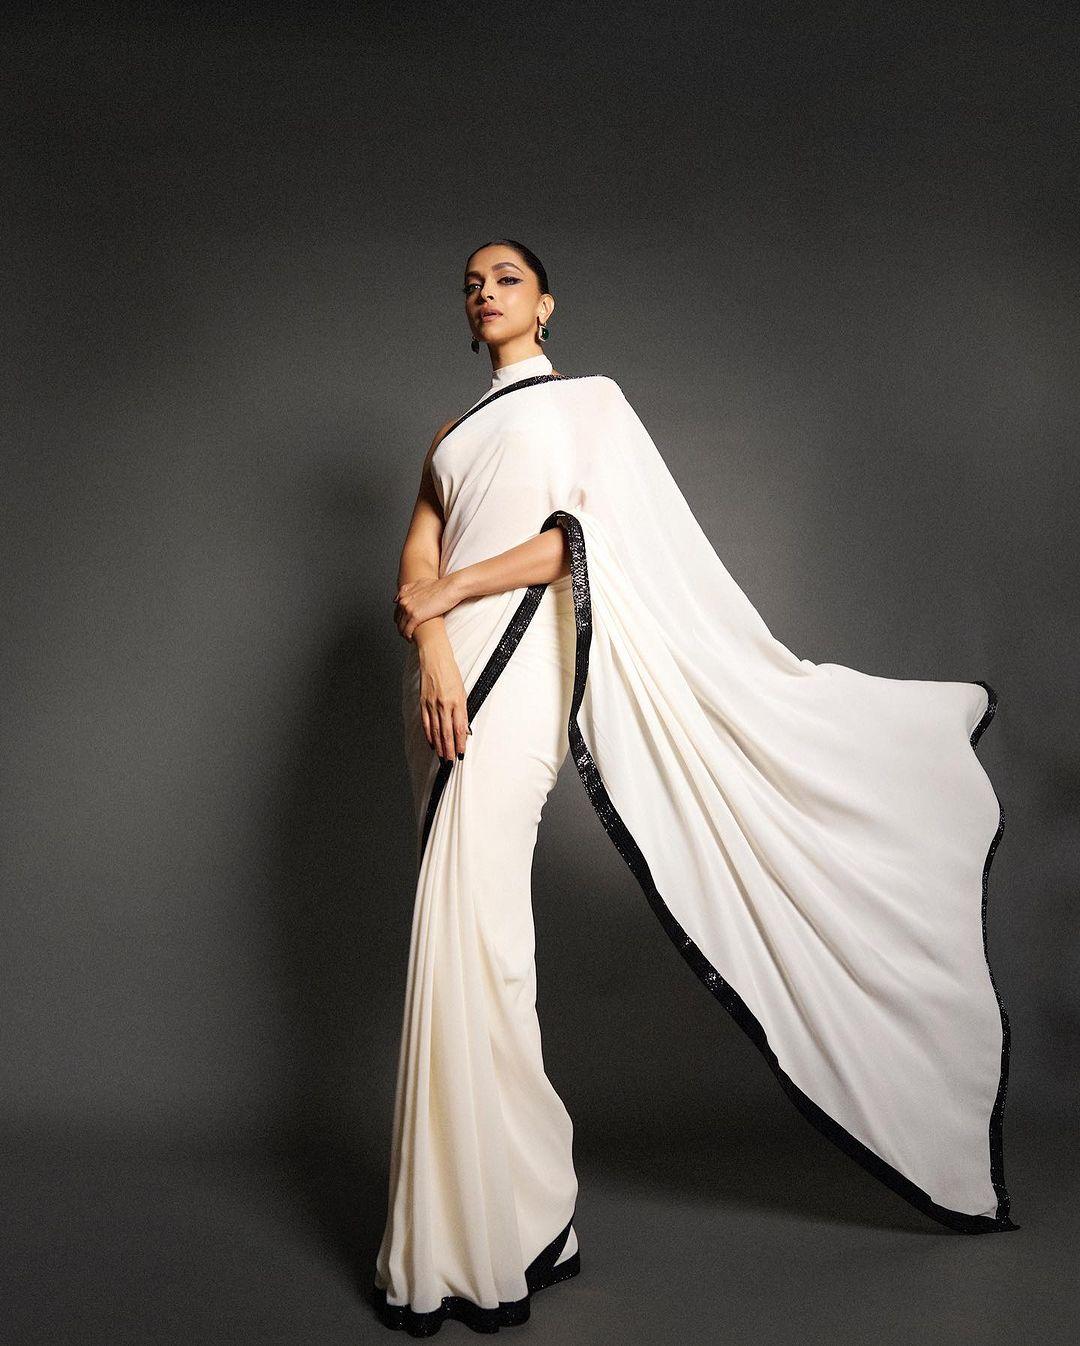 Another look by Deepika that stands tall for Navratri fashion is this exquisite white saree. This saree is the perfect choice and can be worn on October 16, the designated 'white' day of Navratri 